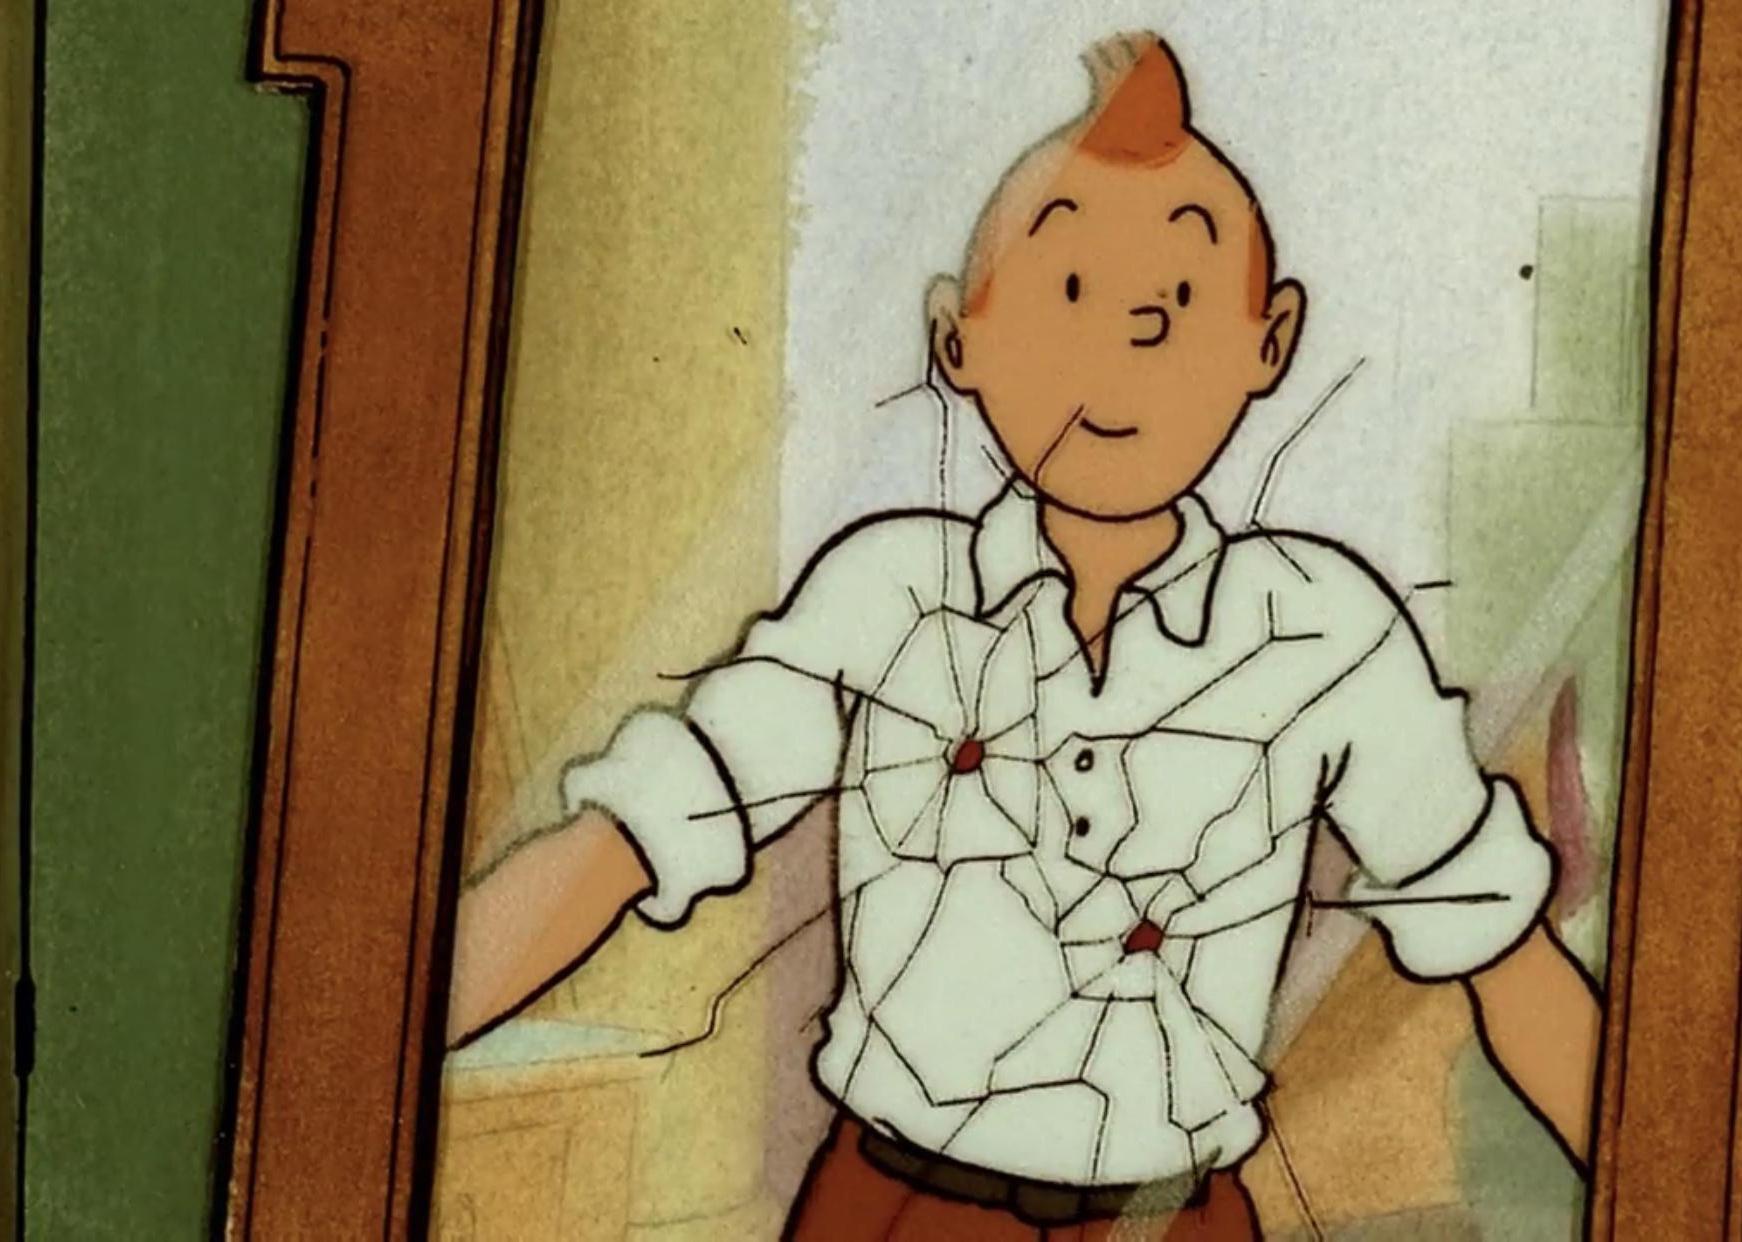 A cartoon character in front of a shattered mirror.